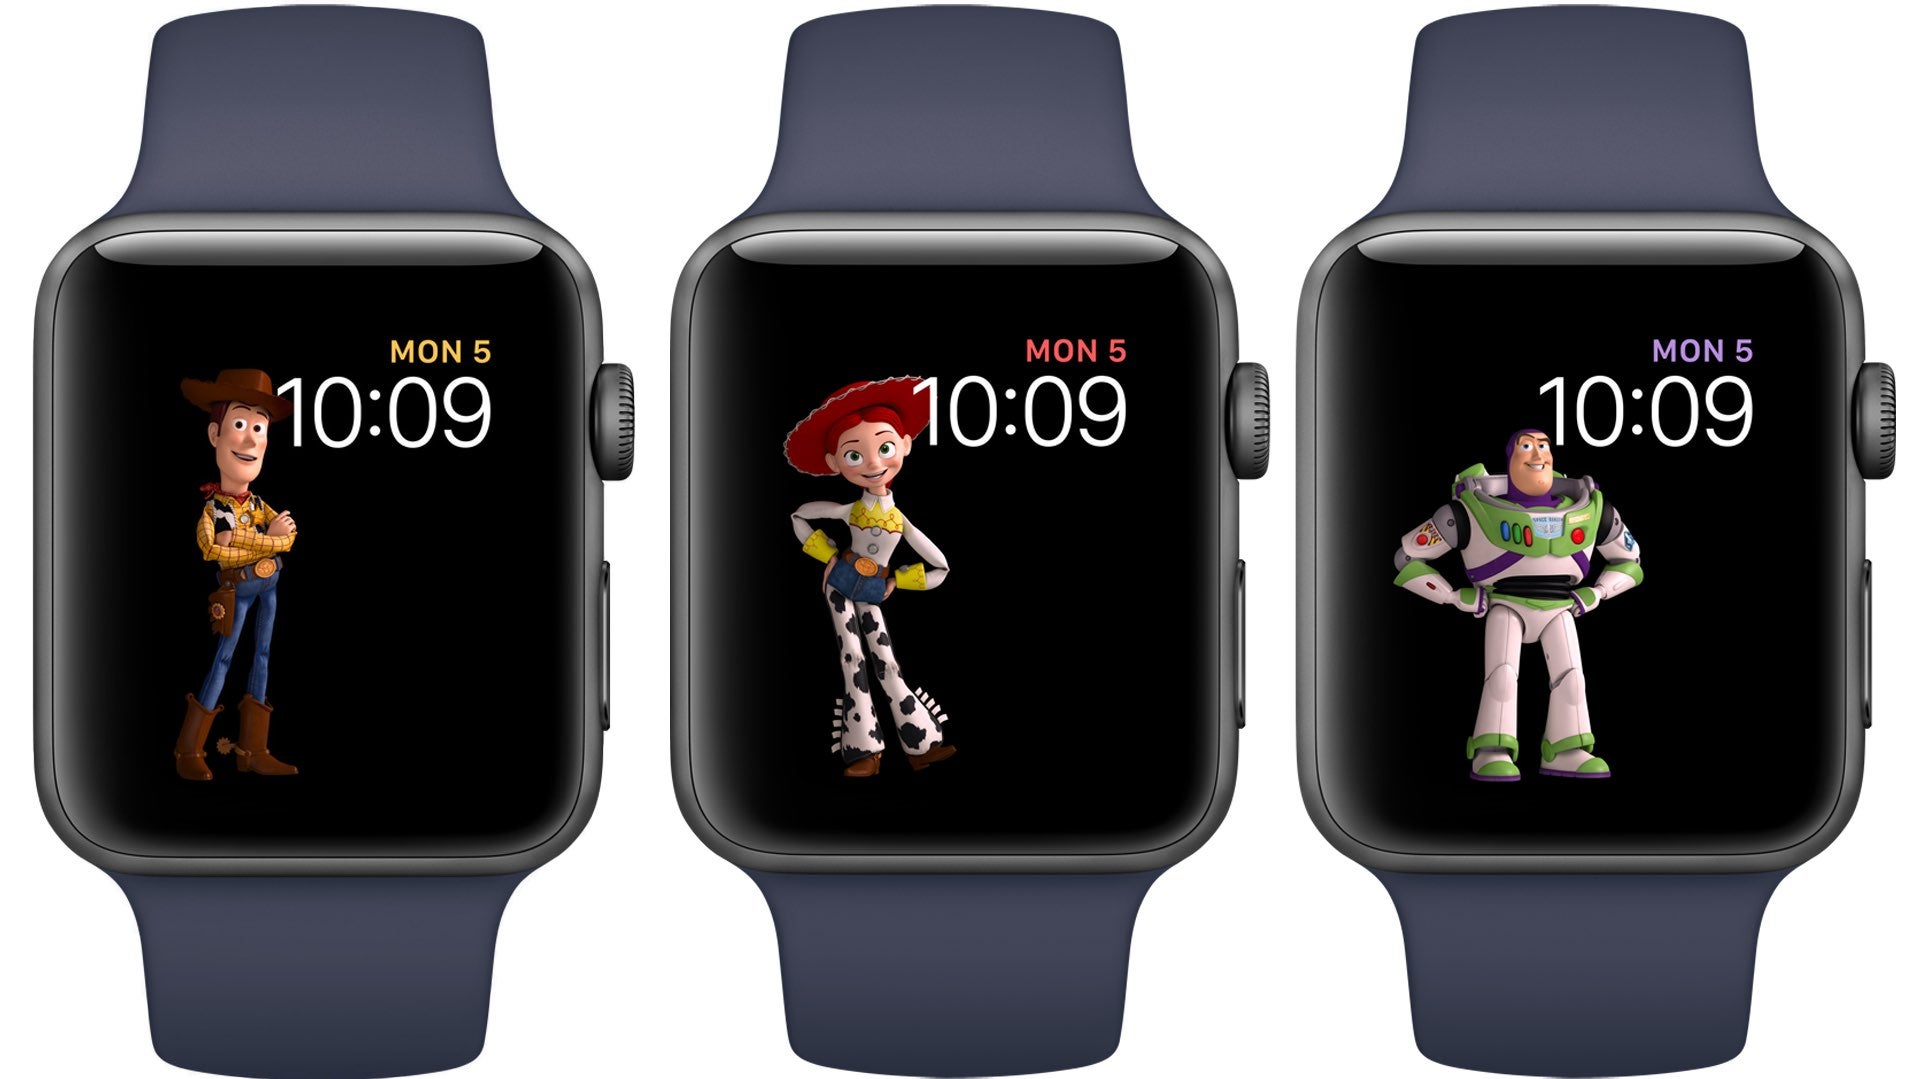 New watch faces with animated Toy Story characters - Apple releases watchOS 4 beta 5 for Apple Watch